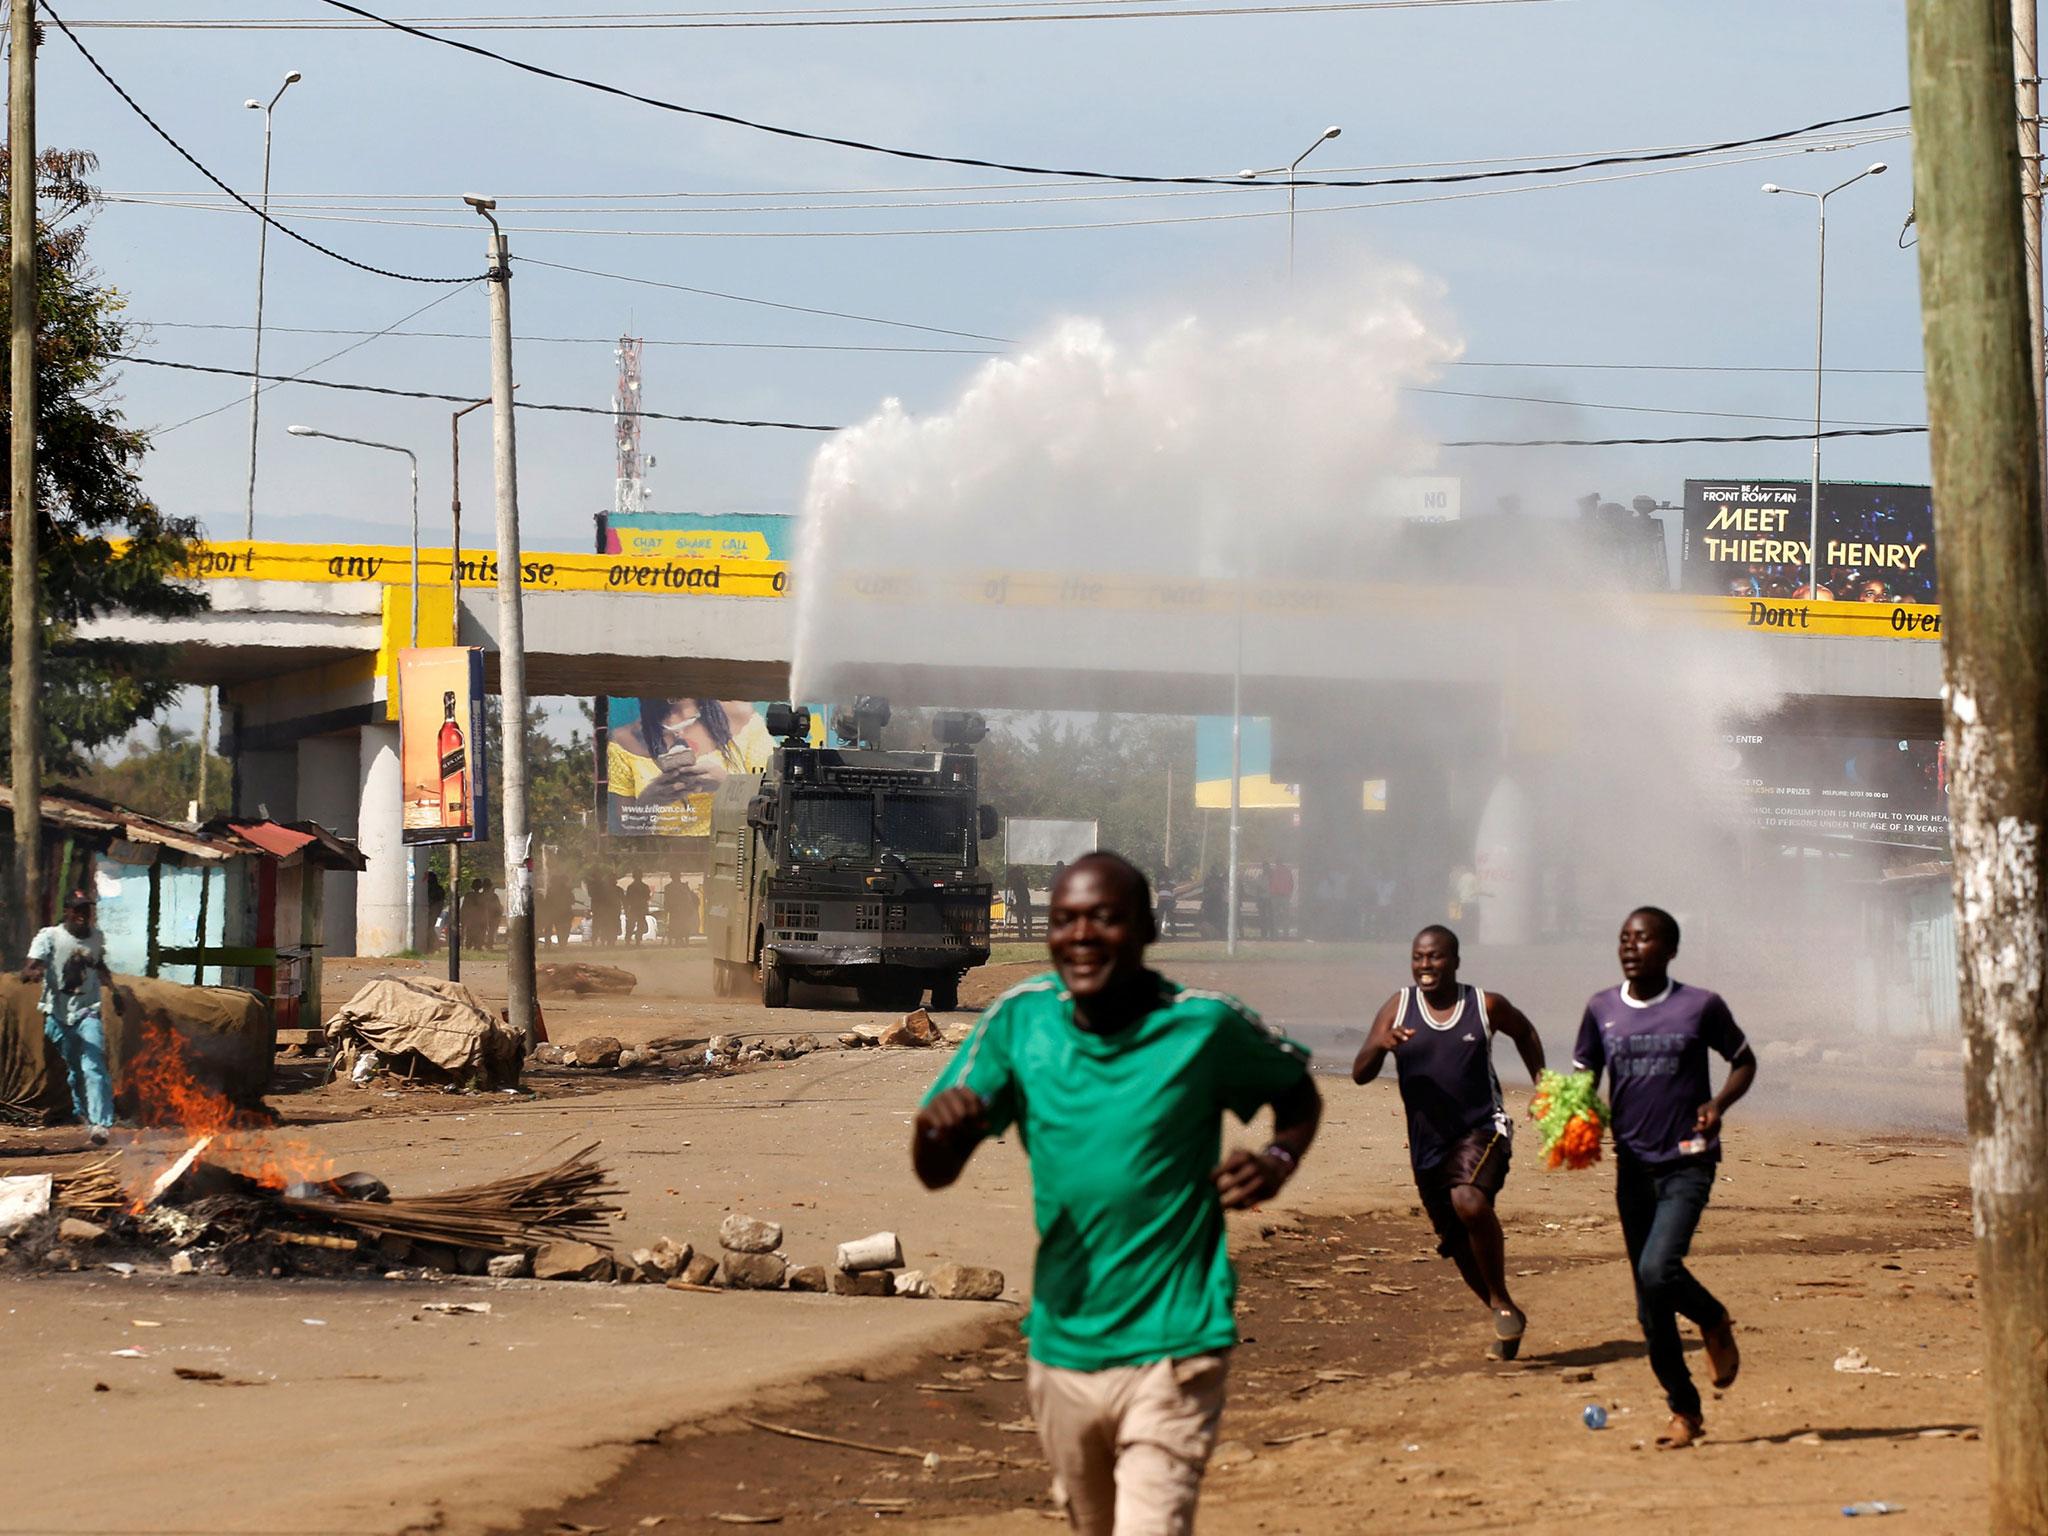 Kenyan anti-riot police deploy a water cannon during clashes with supporters of Kenyan opposition leader Raila Odinga in Kisumu